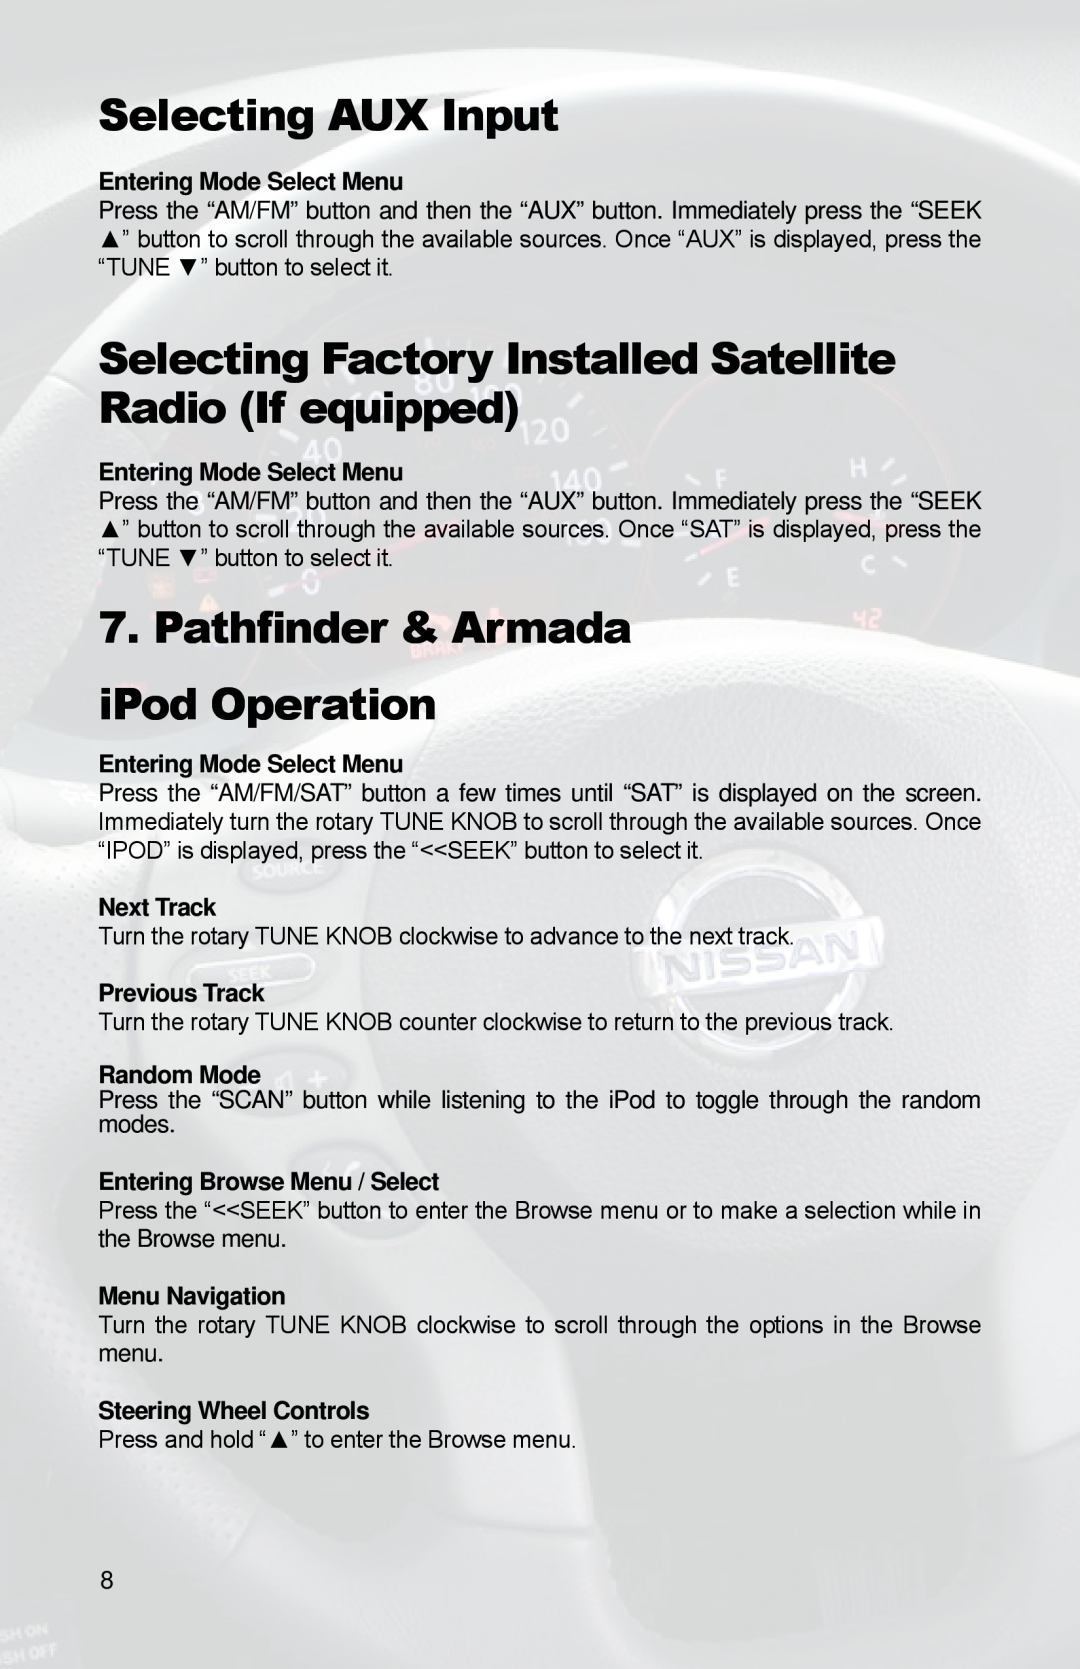 iSimple PGHNI2 owner manual Selecting AUX Input, Pathfinder & Armada iPod Operation 